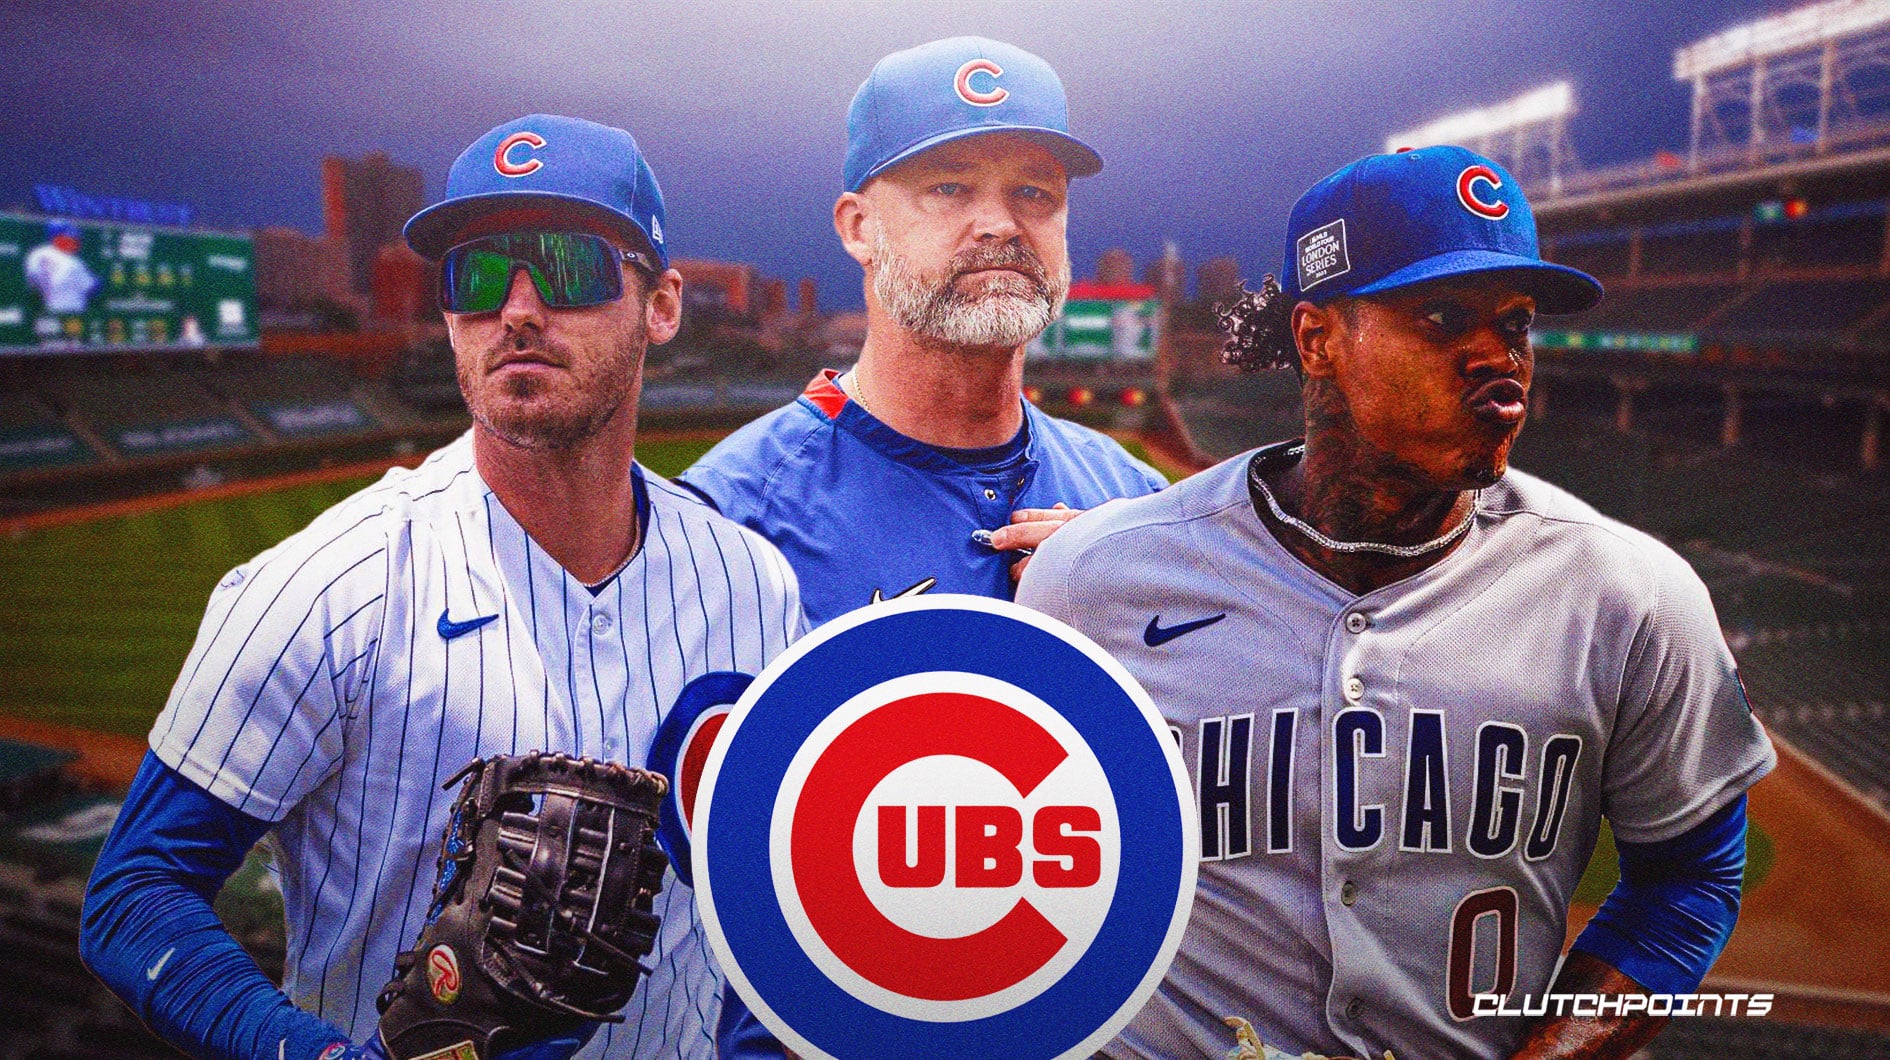 Baseball Way Back: From Cubs All-Star to Giant success